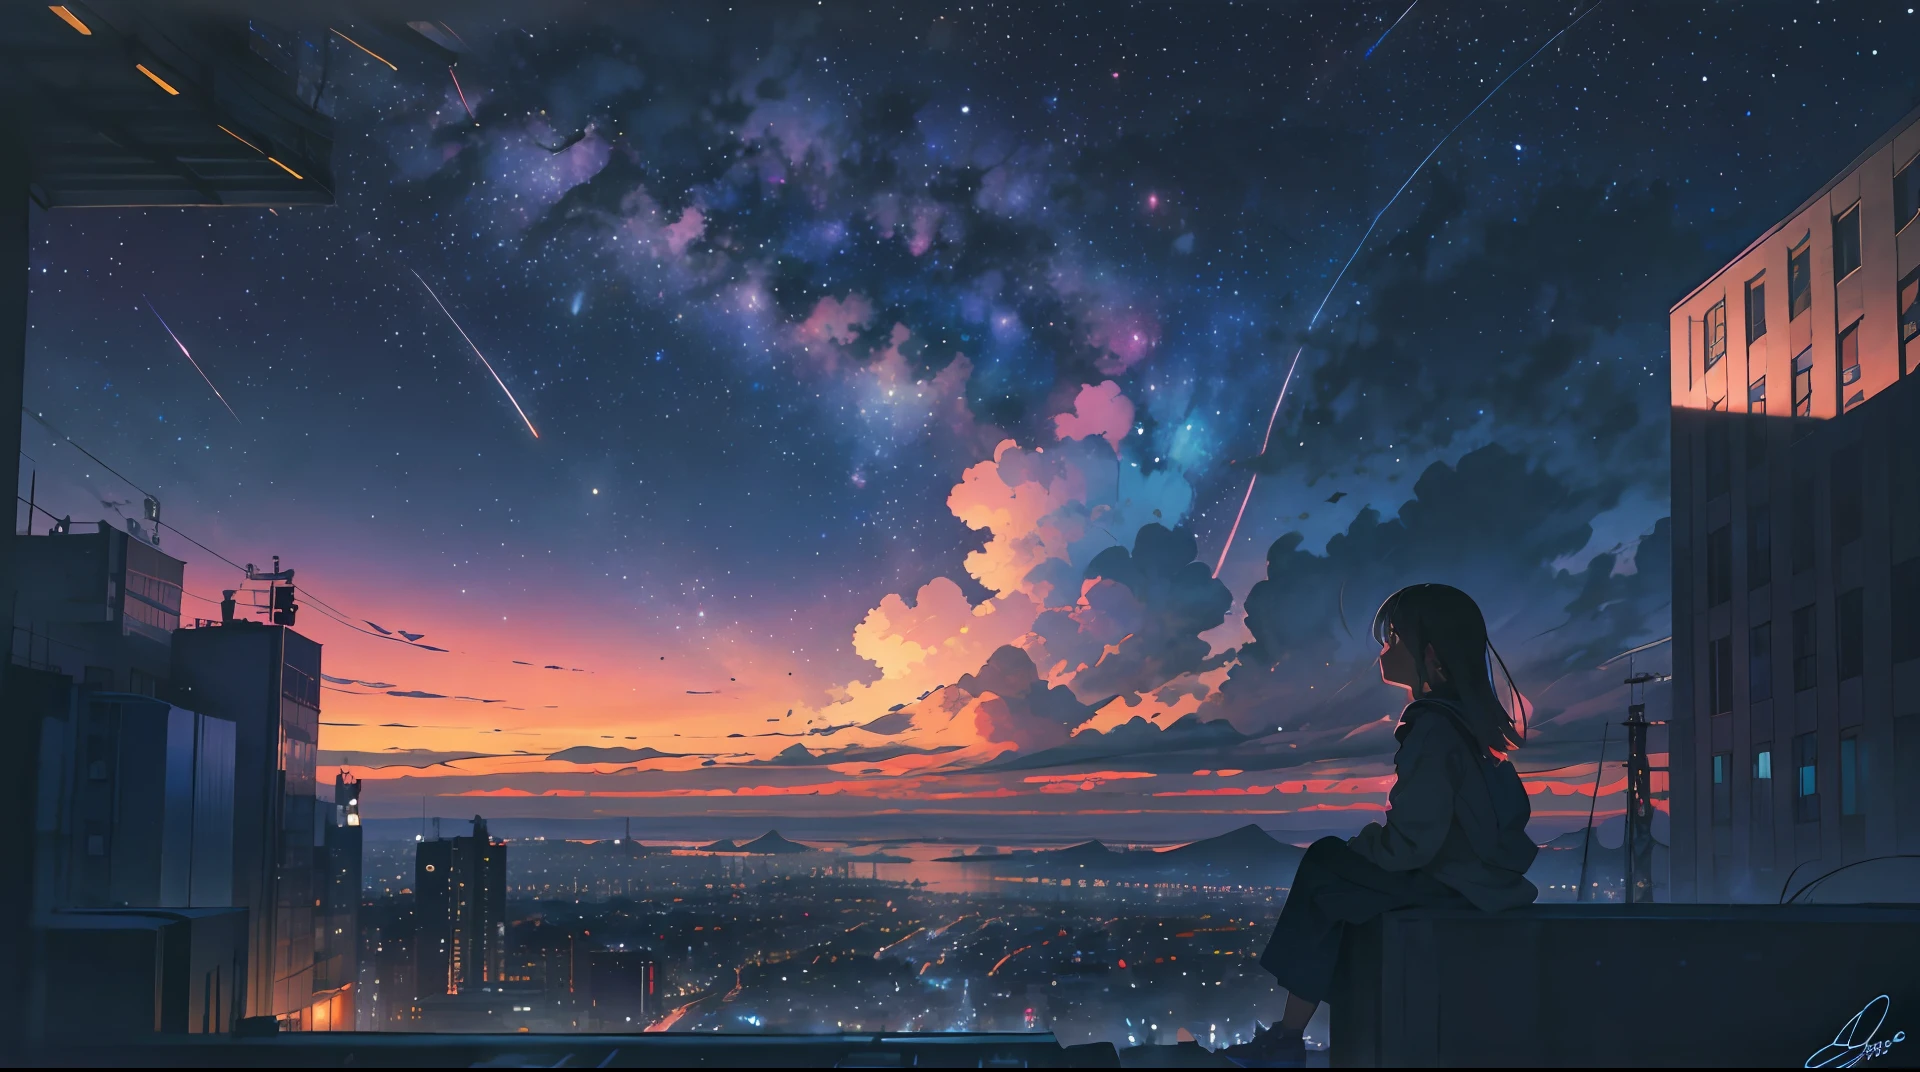 octane, sky, Star (sky), scenery, Starry sky, Night, 1girll, Night sky, Solo, Outdoors, signatures, Building, Cloud, Milky Way, Sitting, Size tree, a bird，Long hair, City, Silhouette, Cityscape